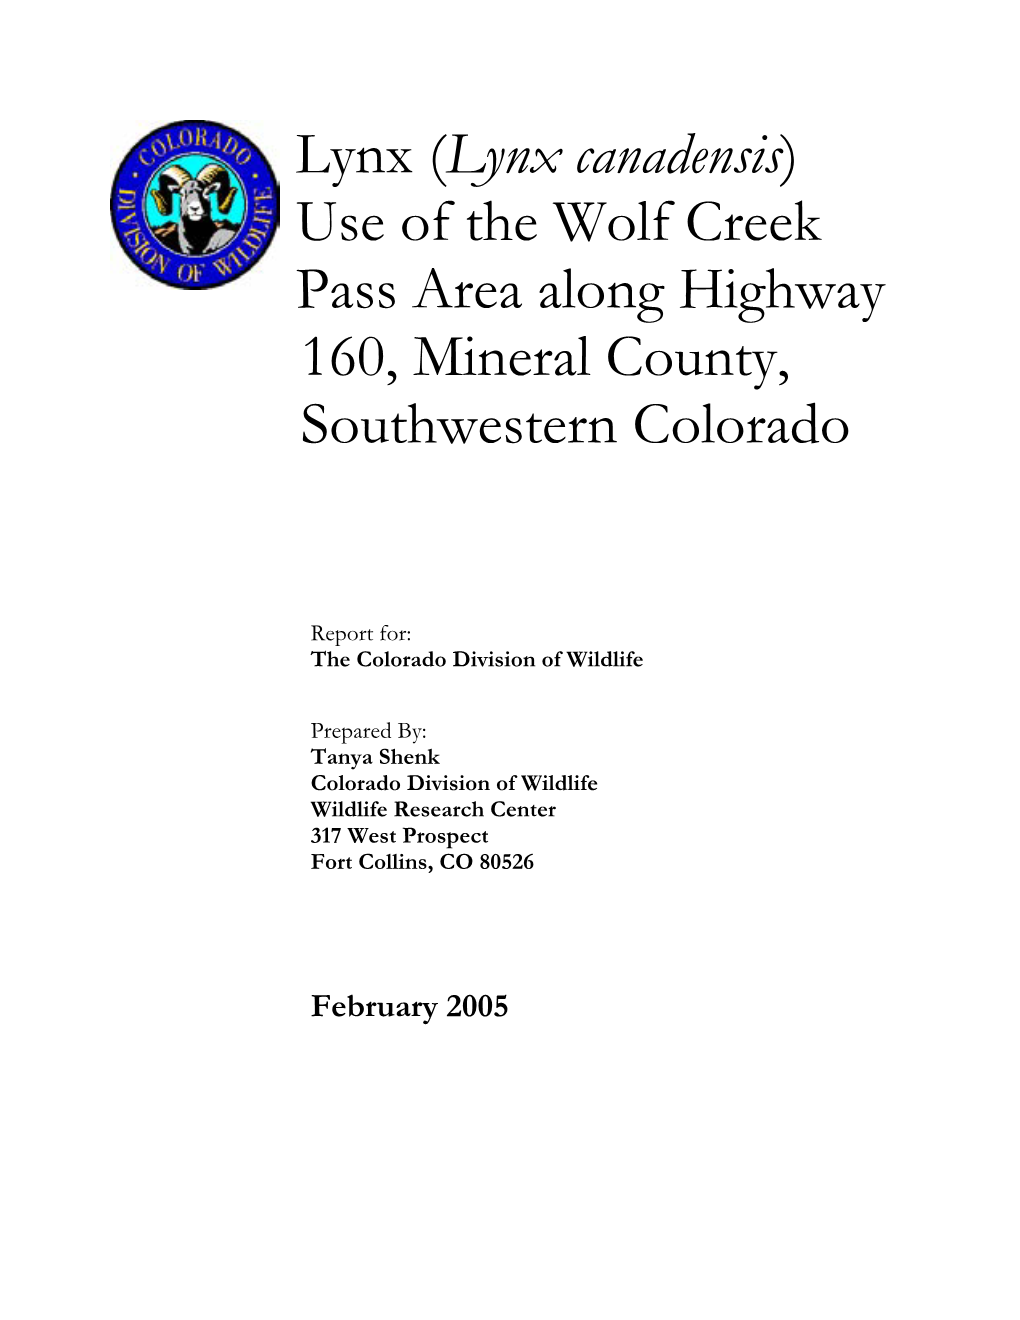 Report: Lynx Use of the Wolf Creek Pass Along Highway 160 in Southwestern Colorado